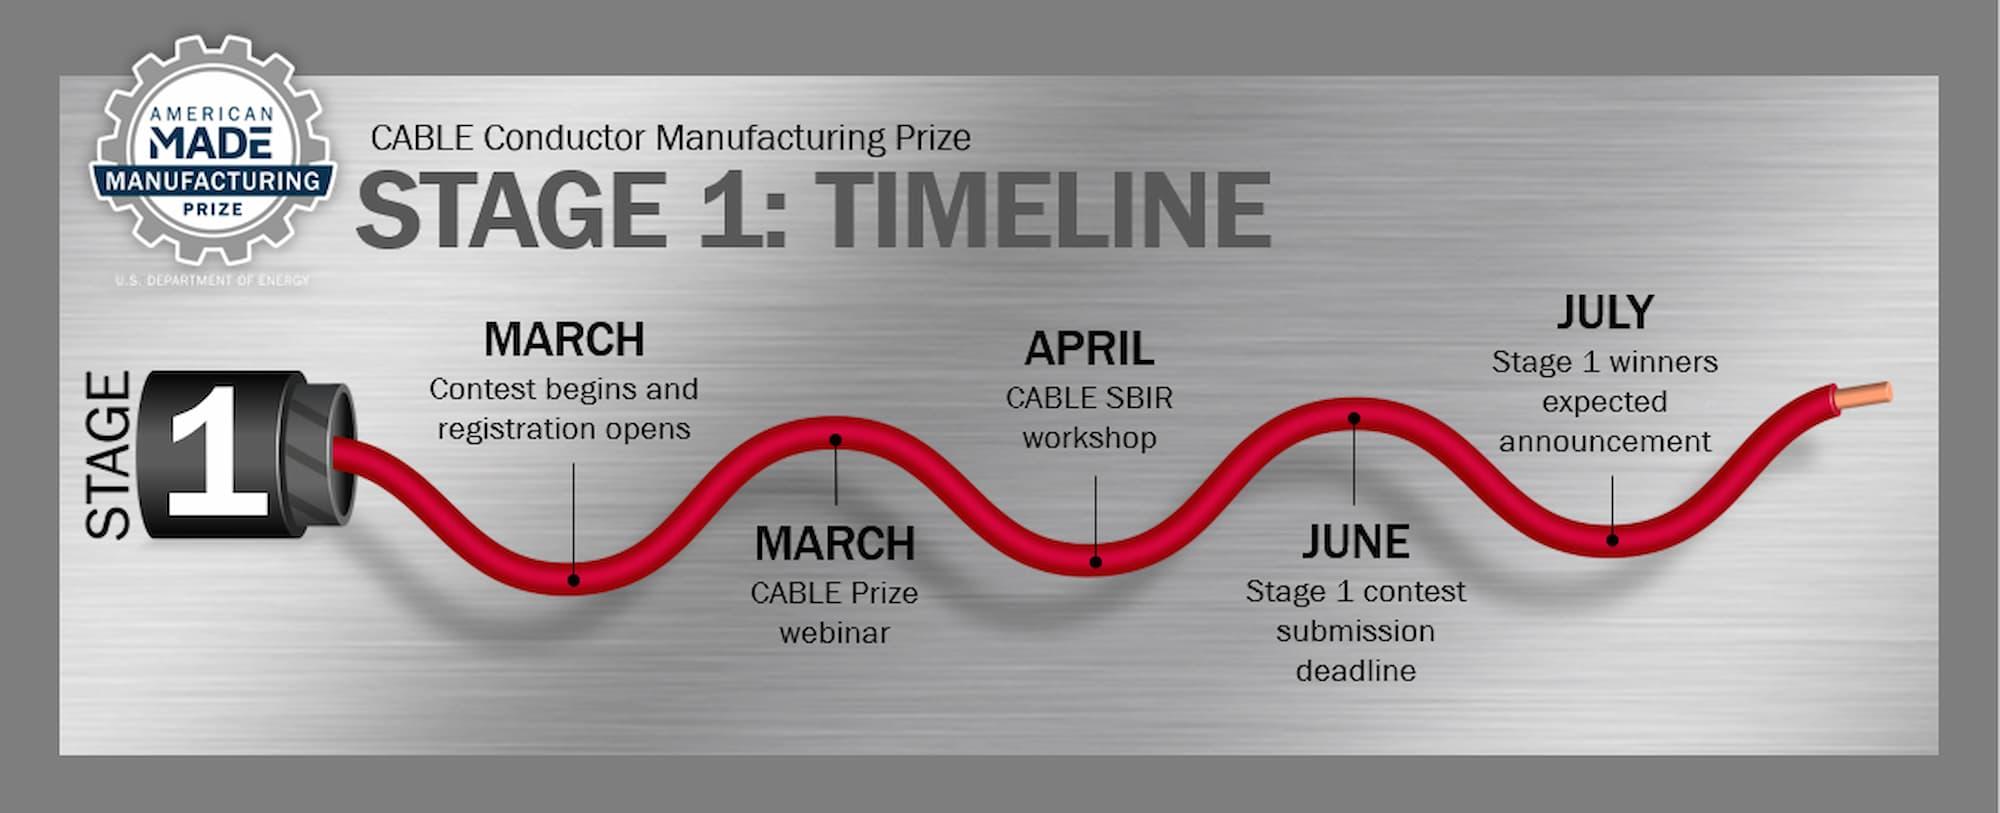 The CABLE Conductor Manufacturing Prize Stage 1 timeline graphic of a illustrated cable with monthly milestones